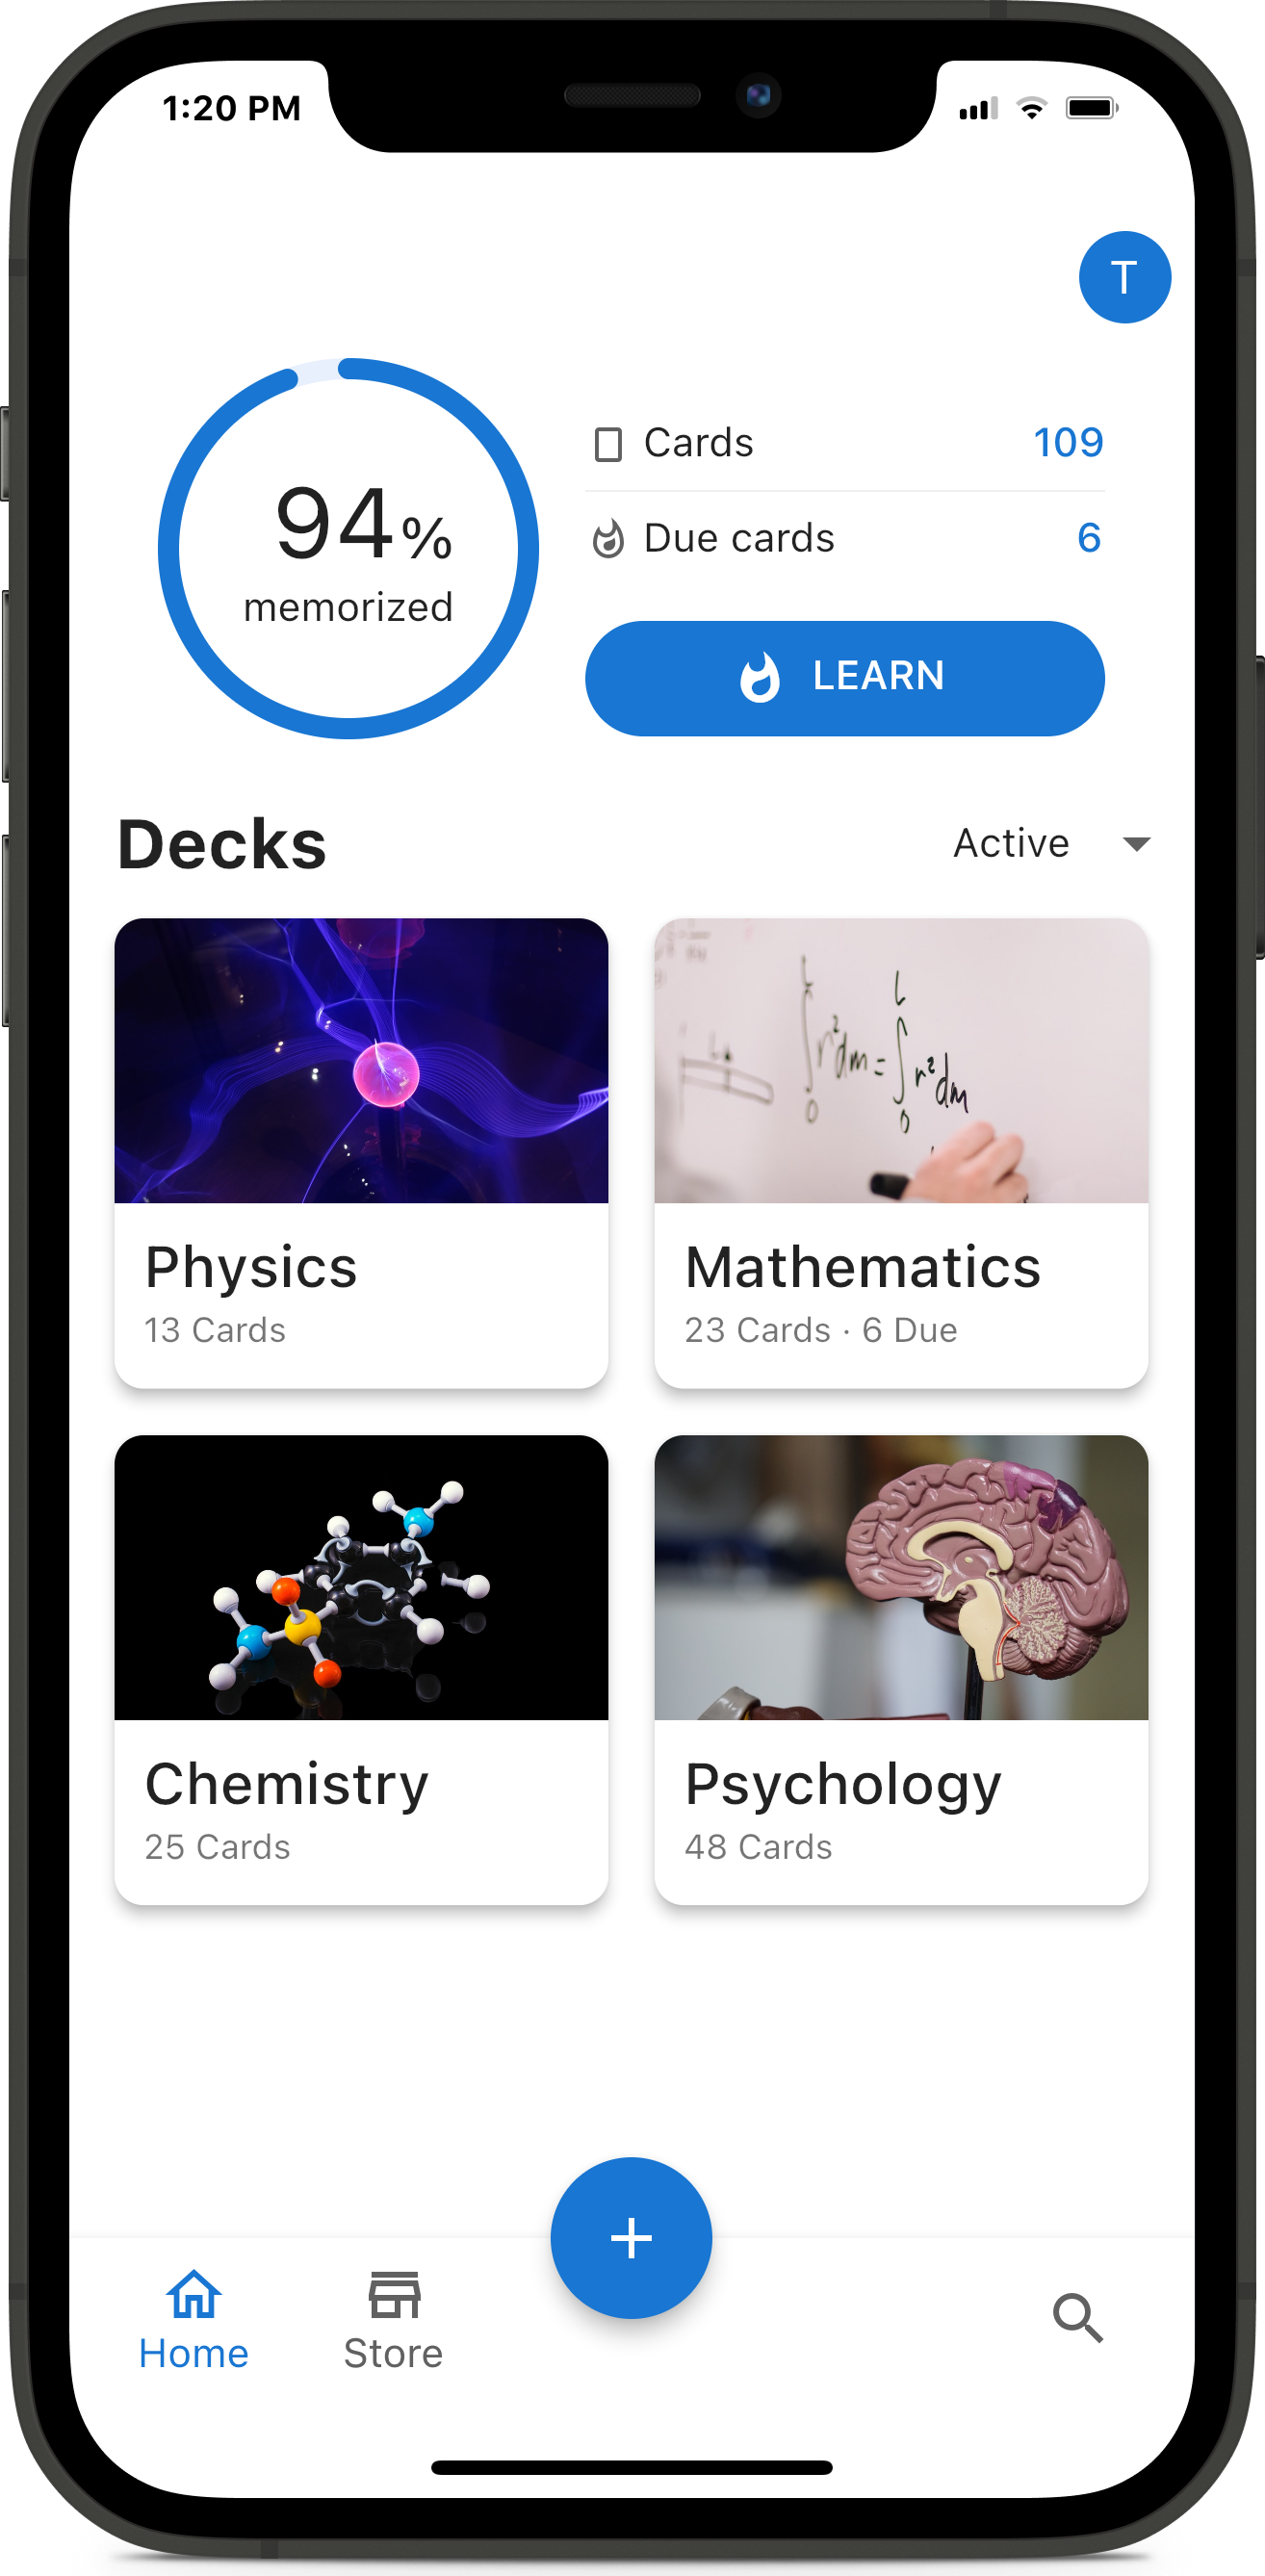 Learn with science-based Spaced Repetition flashcards